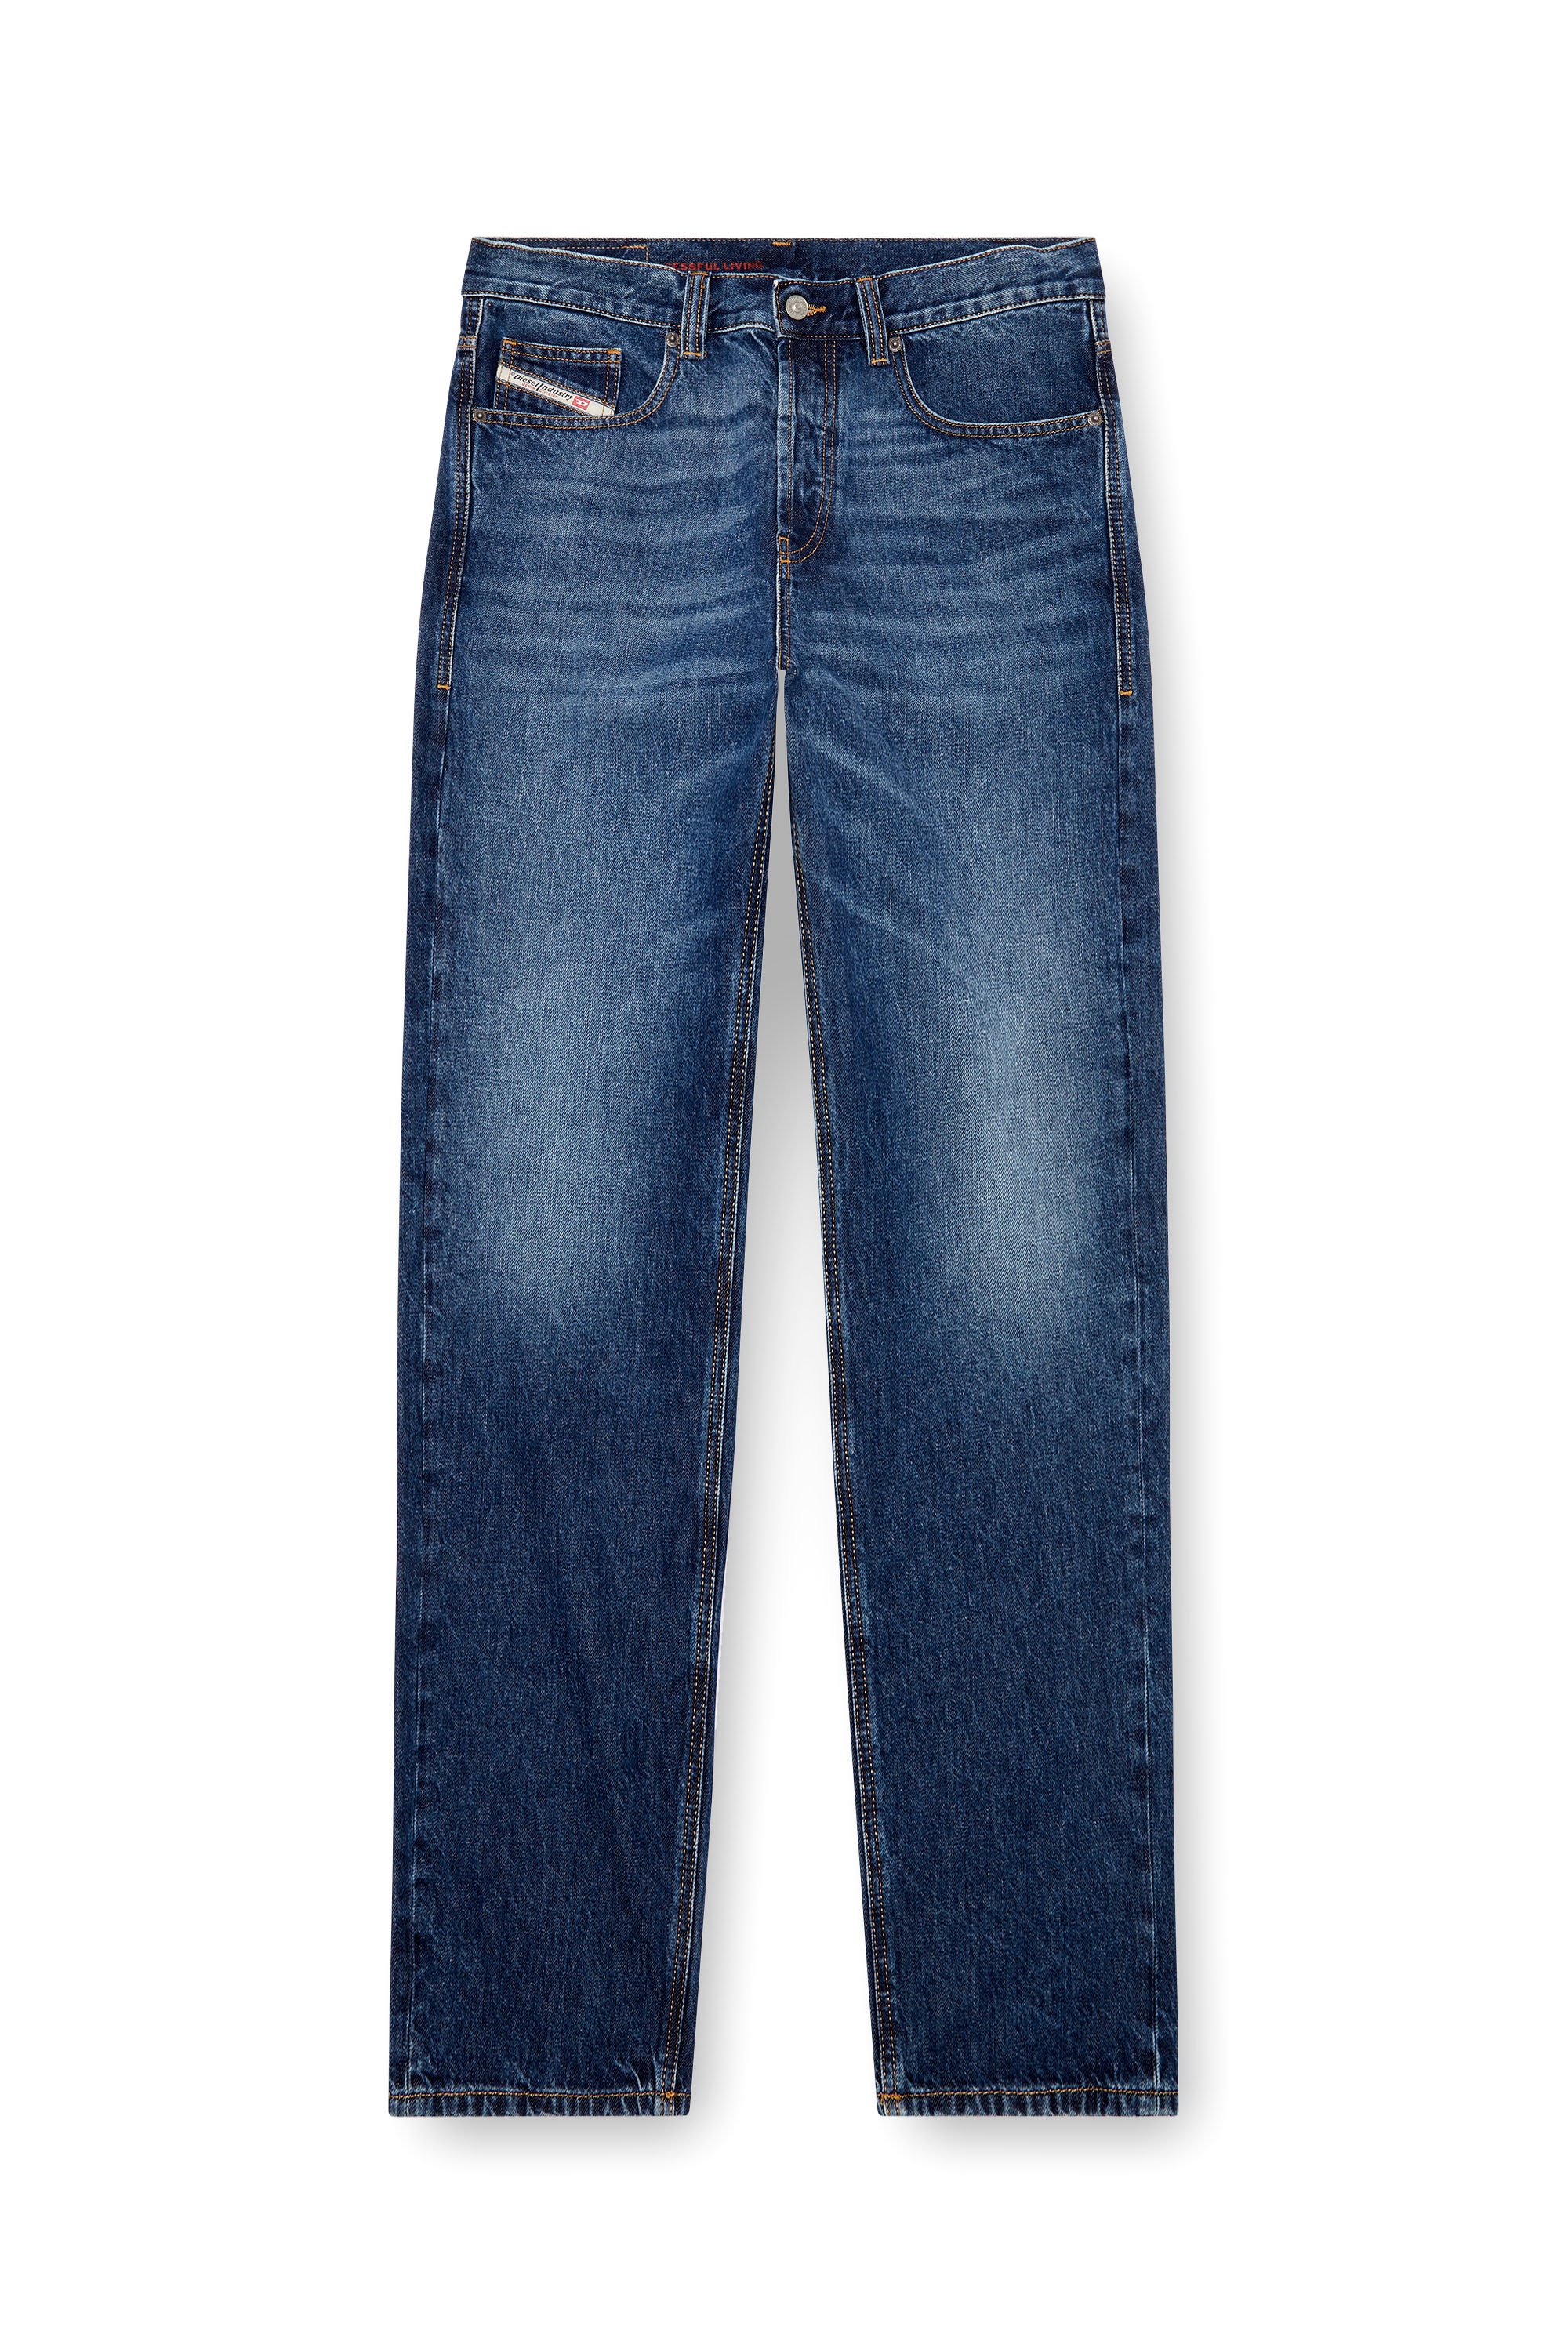 Diesel - Straight Jeans 2010 D-Macs 09I27, Hombre Straight Jeans - 2010 D-Macs in Azul marino - Image 5